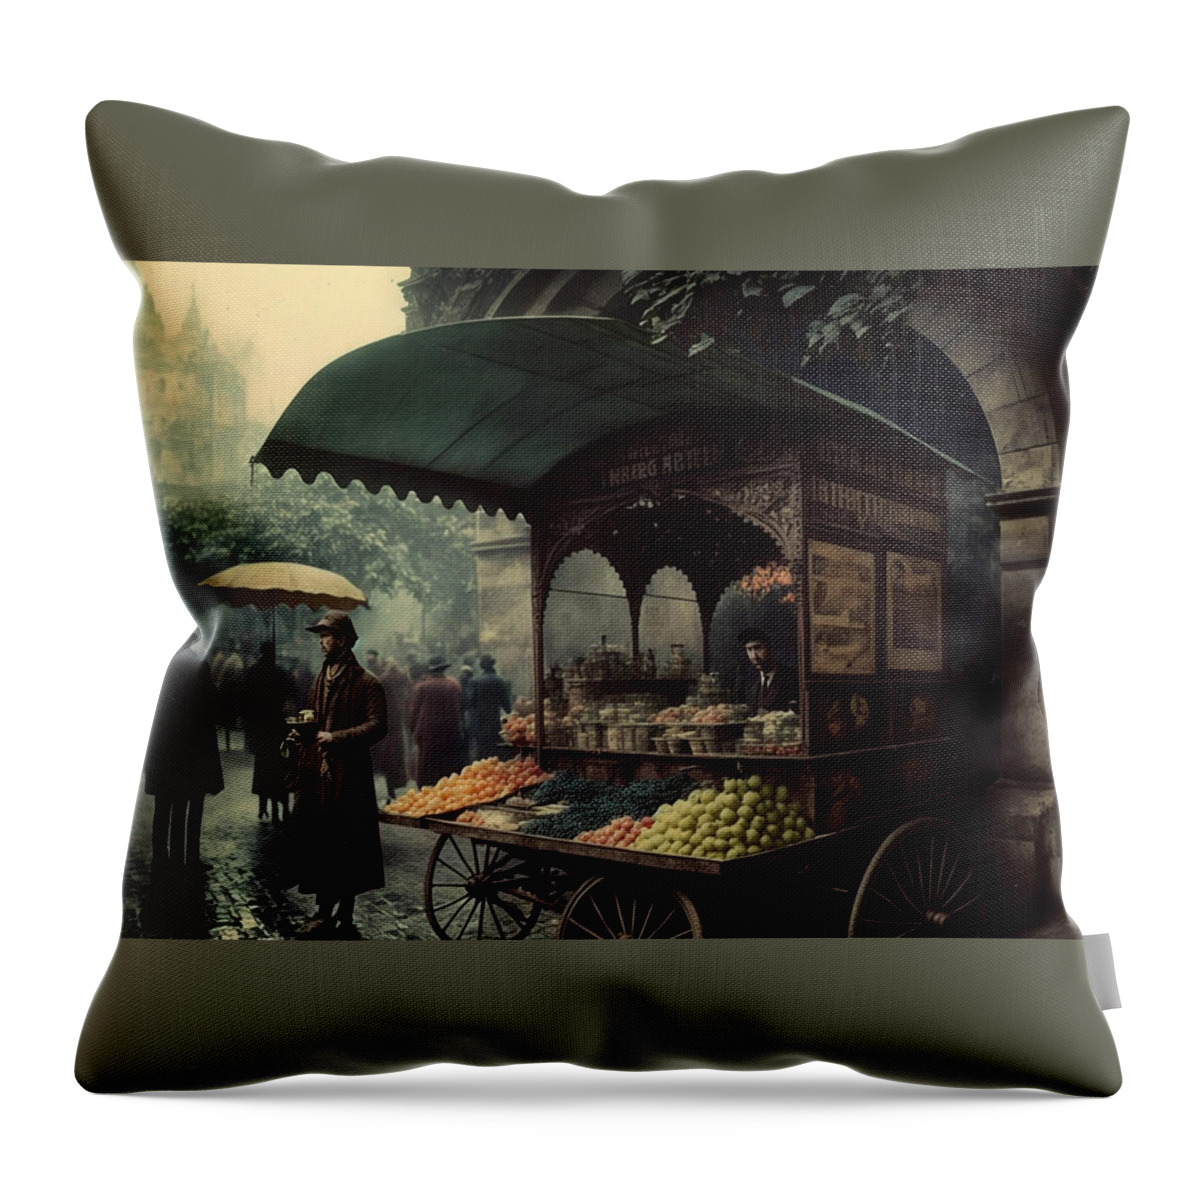 Autochrome An Outdoor Fruit Stand Art Throw Pillow featuring the painting autochrome an outdoor fruit stand a steam by Asar Studios #4 by Celestial Images